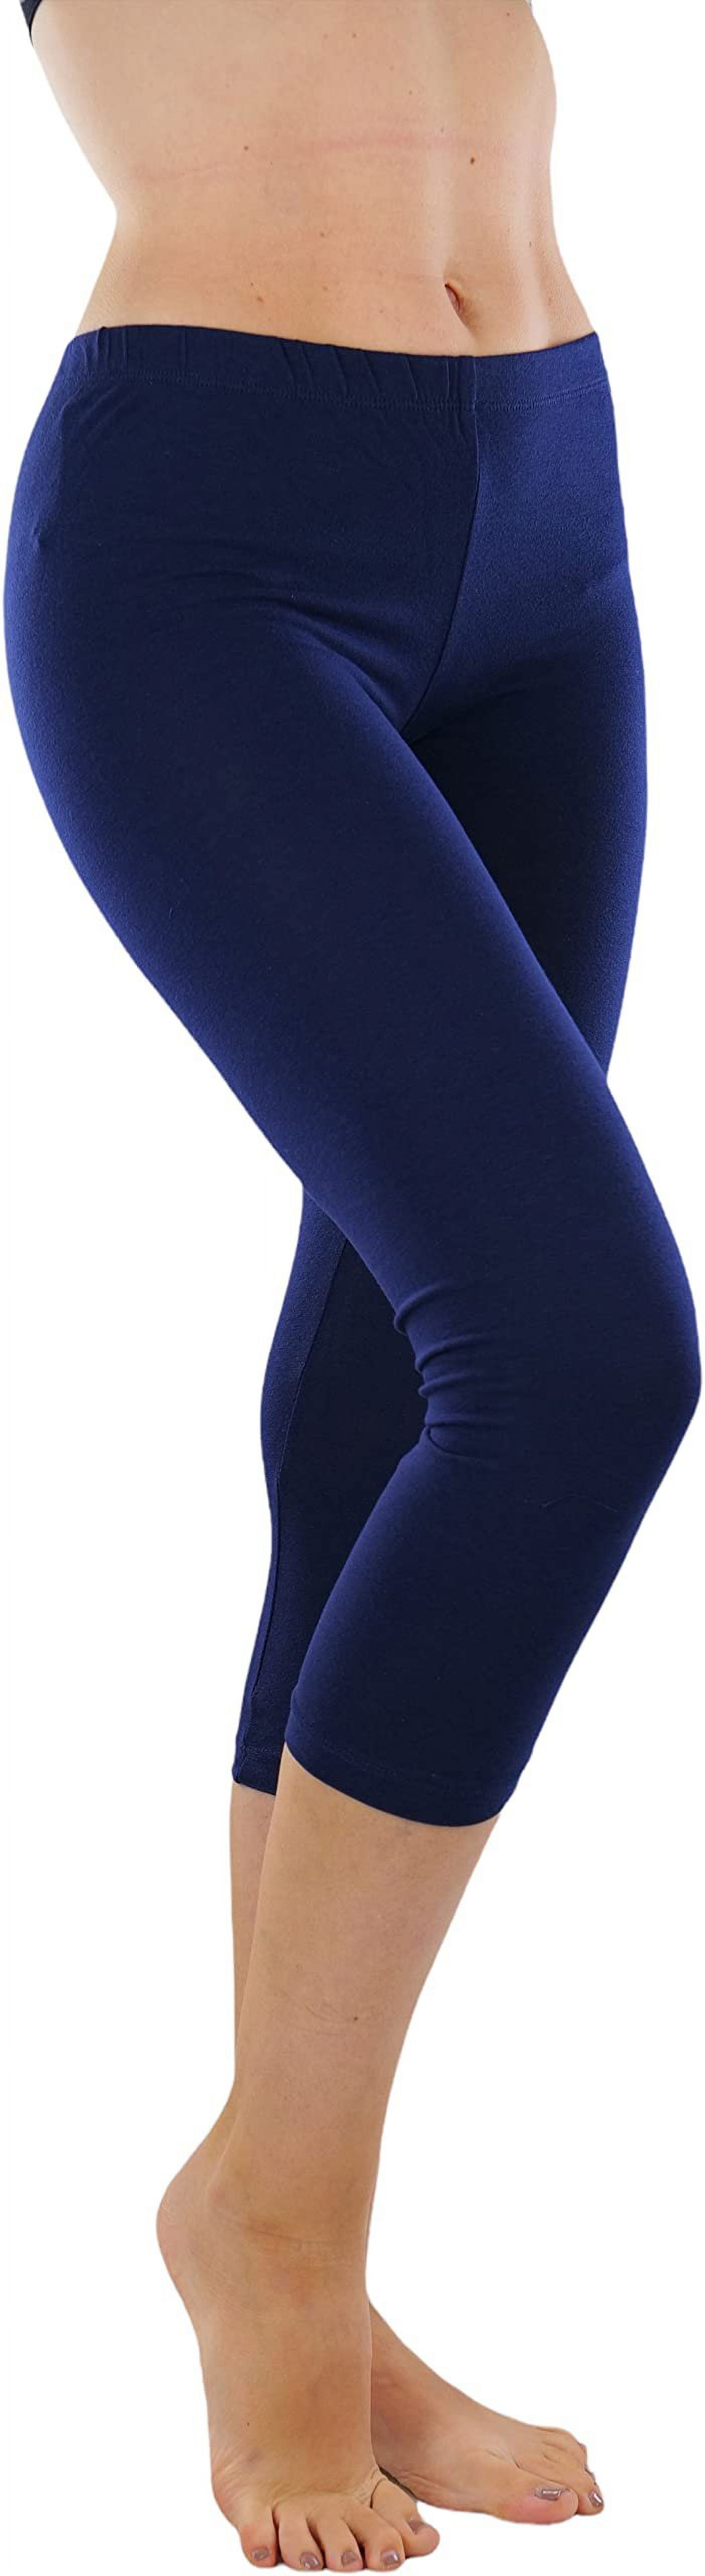 ToBeInStyle Women's Seamless Cotton Stretchy Band Yoga Activewear